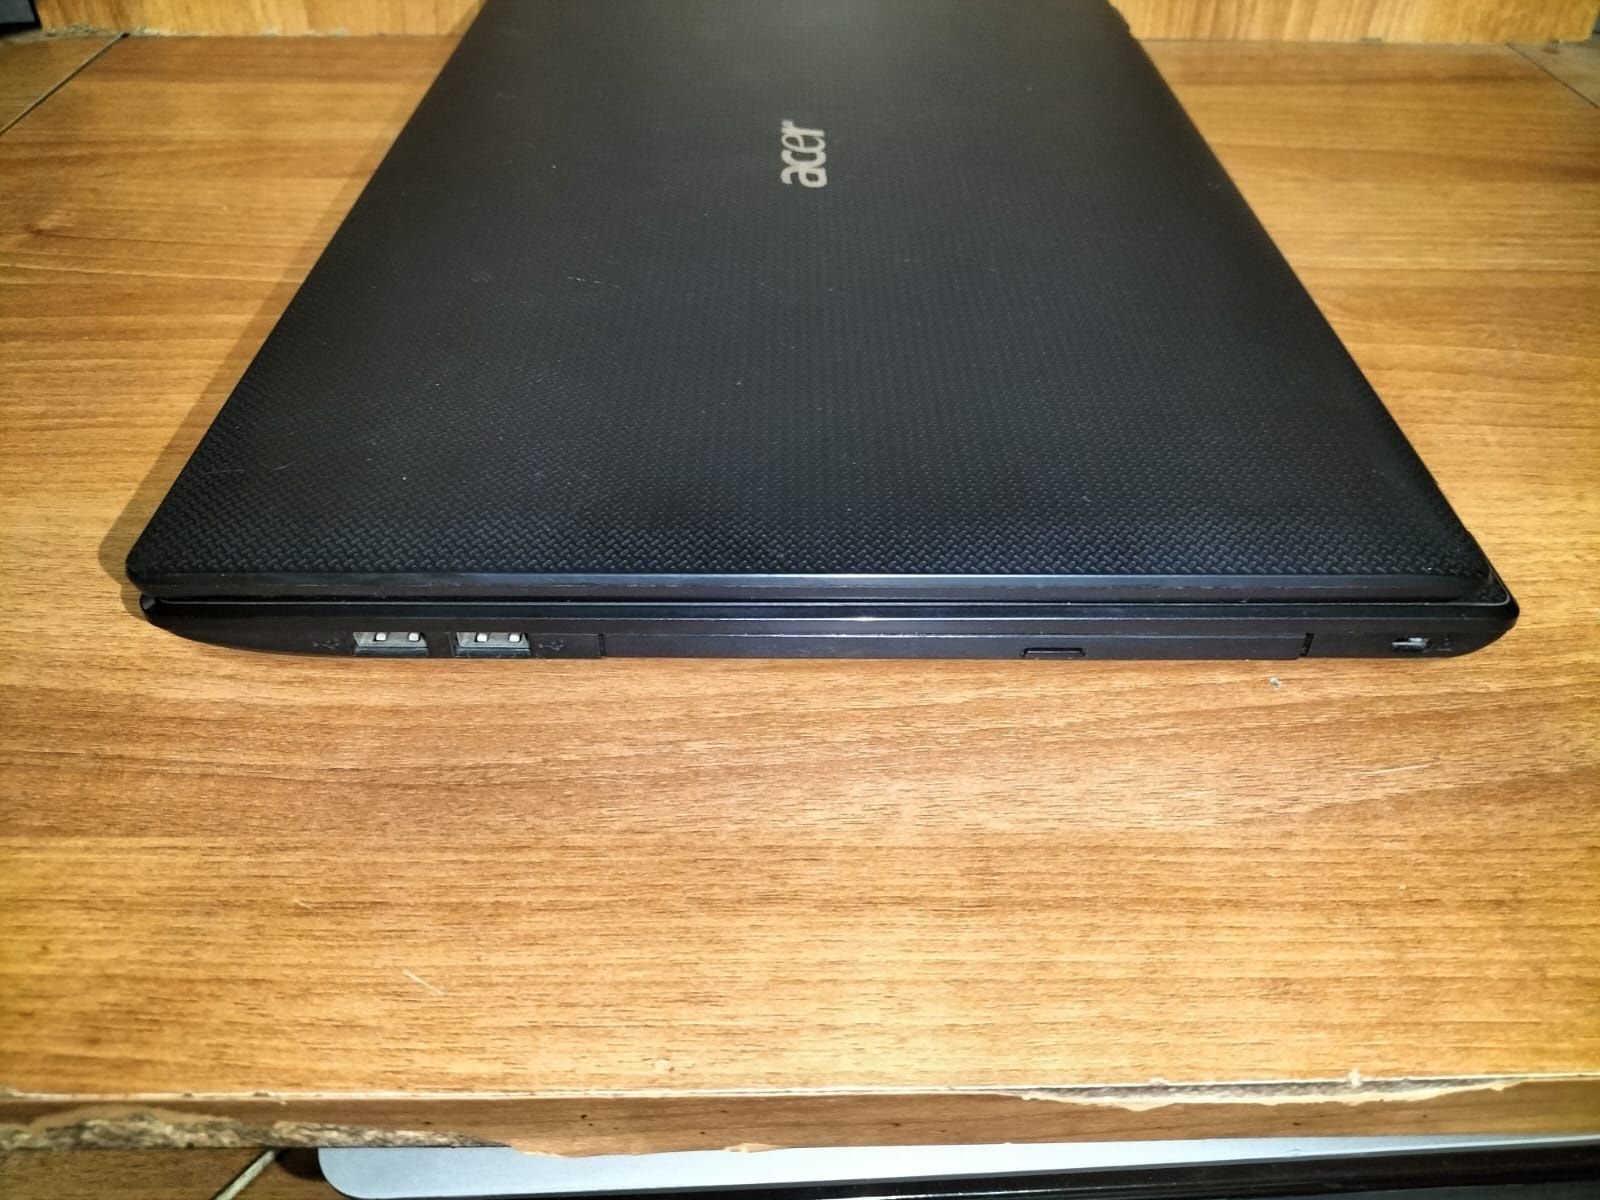 Laptop Acer Aspire 5736Z t4500,4gb ,15.6 lcd,hdd 80gb